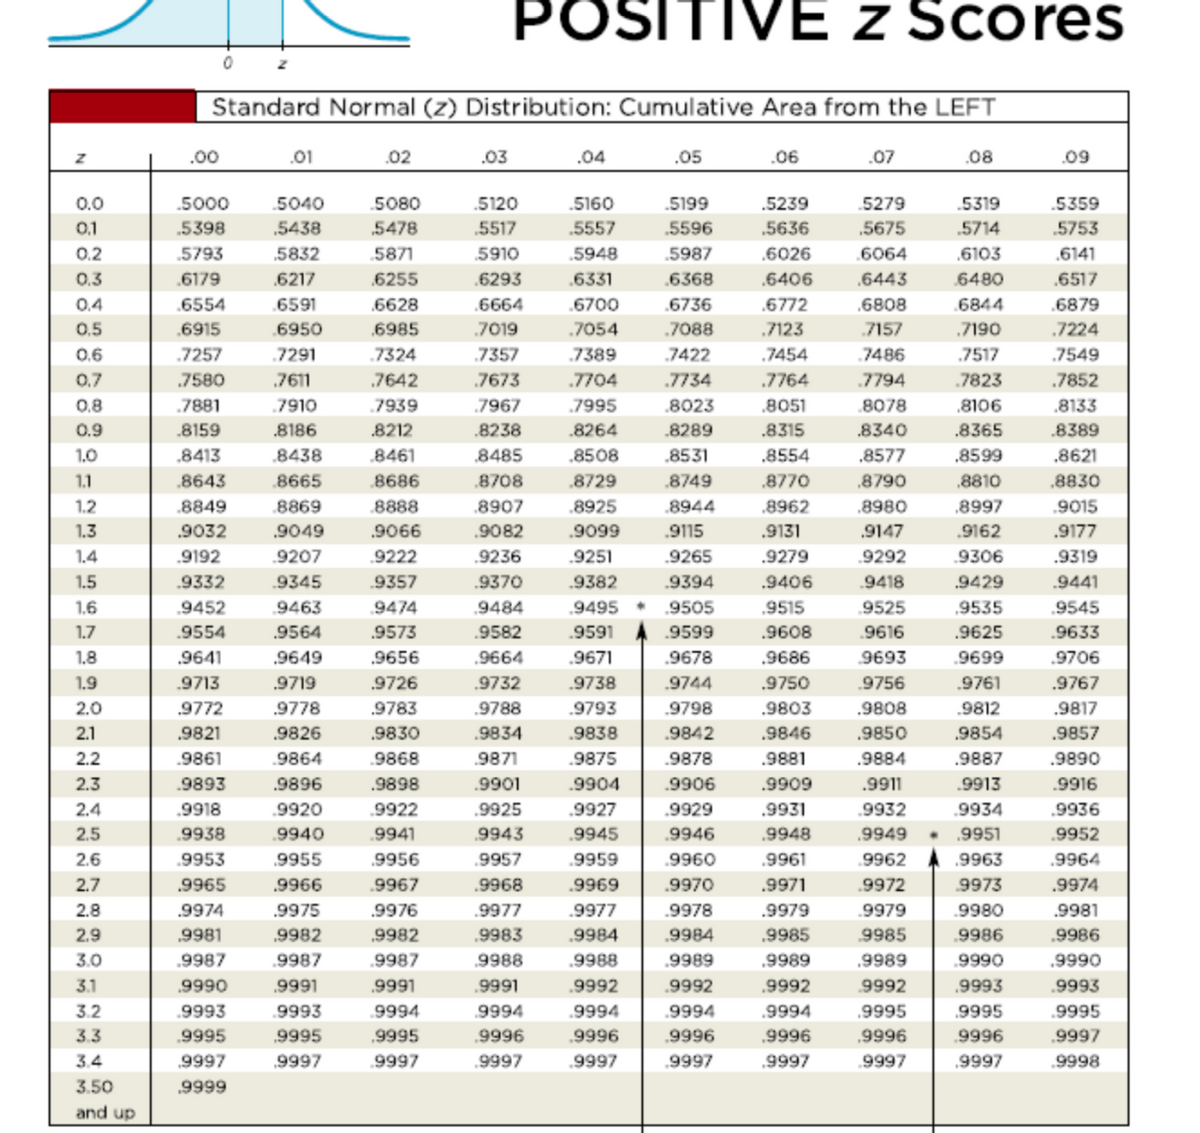 POSITIVE z Scores
Standard Normal (z) Distribution: Cumulative Area from the LEFT
.00
.01
.02
.03
.04
.05
.06
.07
.08
.09
0.0
.5000
.5040
.5080
.5120
.5160
.5199
.5239
.5279
.5319
.5359
0.1
.5398
,5438
5478
.5517
.5557
.5596
.5636
.5675
.5714
.5753
0.2
.5793
.5832
5871
.5910
.5948
.5987
.6026
.6064
.6103
.6141
0.3
0.4
.6179
.6217
.6255
.6293
.6331
.6368
.6406
.6443
6480
.6517
.6554
.6591
.6628
.6664
.6700
.6736
.6772
.6808
.6844
.6879
0.5
.6915
.6950
.6985
7019
.7054
.7088
7123
7157
.7190
.7224
0.6
.7257
7291
7324
7357
7389
7422
7454
7486
.7517
7549
0.7
7580
7611
.7642
.7673
.7704
.7734
.7764
.7794
7823
.7852
0.8
7881
7910
7939
7967
7995
.8023
.8051
8078
.8106
.8133
0.9
.8159
.8186
.8212
.8238
.8264
.8289
.8315
.8340
.8365
.8389
1.0
.8413
.8438
8461
8485
.8508
.8531
.8554
.8577
.8599
.8621
1.1
.8643
8665
8686
8708
.8729
.8749
.8770
8790
,8810
.8830
1.2
.8849
8869
8888
8907
.8925
.8944
.8962
.8980
.8997
.9015
1.3
.9032
.9049
.9066
.9082
.9099
.9115
.9131
.9147
.9162
.9177
1.4
.9192
.9207
.9222
.9236
.9251
.9265
.9279
.9292
.9306
.9319
1.5
.9332
.9345
.9357
.9370
.9382
.9394
.9406
.9418
.9429
.9441
1.6
.9452
9463
9474
9484
.9495 * 9505
,9515
.9525
.9535
.9545
1.7
.9554
.9564
.9573
.9582
.9591
.9599
.9608
.9616
.9625
.9633
1.8
.9641
.9649
.9656
.9664
.9671
.9678
.9686
9693
.9699
.9706
1.9
.9713
.9719
.9726
.9732
.9738
.9744
.9750
.9756
.9761
.9767
2.0
.9772
.9778
.9783
.9788
.9793
.9798
.9803
.9808
.9812
.9817
2.1
.9821
.9826
.9830
.9834
.9838
.9842
.9846
.9850
.9854
.9857
2.2
.9861
.9864
.9868
.9871
.9875
.9878
.9881
.9884
.9887
.9890
2.3
.9893
.9896
.9898
.9901
.9904
.9906
.9909
.9911
.9913
.9916
2.4
.9918
.9920
.9922
.9925
.9927
.9929
.9931
.9932
.9934
.9936
2.5
.9938
.9940
.9941
.9943
.9945
.9946
.9948
.9949
.9951
.9952
2.6
.9953
.9955
.9956
.9957
.9959
.9960
.9961
.9962
.9963
.9964
2.7
.9965
.9966
.9967
.9968
.9969
.9970
.9971
.9972
9973
.9974
2.8
.9974
.9975
.9976
.9977
.9977
.9978
.9979
.9979
.9980
.9981
2.9
.9981
.9982
9982
.9983
.9984
.9984
.9985
9985
.9986
.9986
3.0
.9987
.9987
.9987
9988
.9988
.9989
.9989
.9989
.9990
.9990
3.1
.9990
.9991
.9991
.9991
.9992
.9992
.9992
9992
.9993
.9993
3.2
.9993
.9993
.9994
.9994
.9994
.9994
.9994
.9995
.9995
.9995
3.3
.9995
,9995
,9995
,9996
.9996
.9996
,9996
,9996
.9996
.9997
3.4
9997
.9997
.9997
.9997
.9997
.9997
,9997
.9997
,9997
.9998
3.50
,9999
and up
